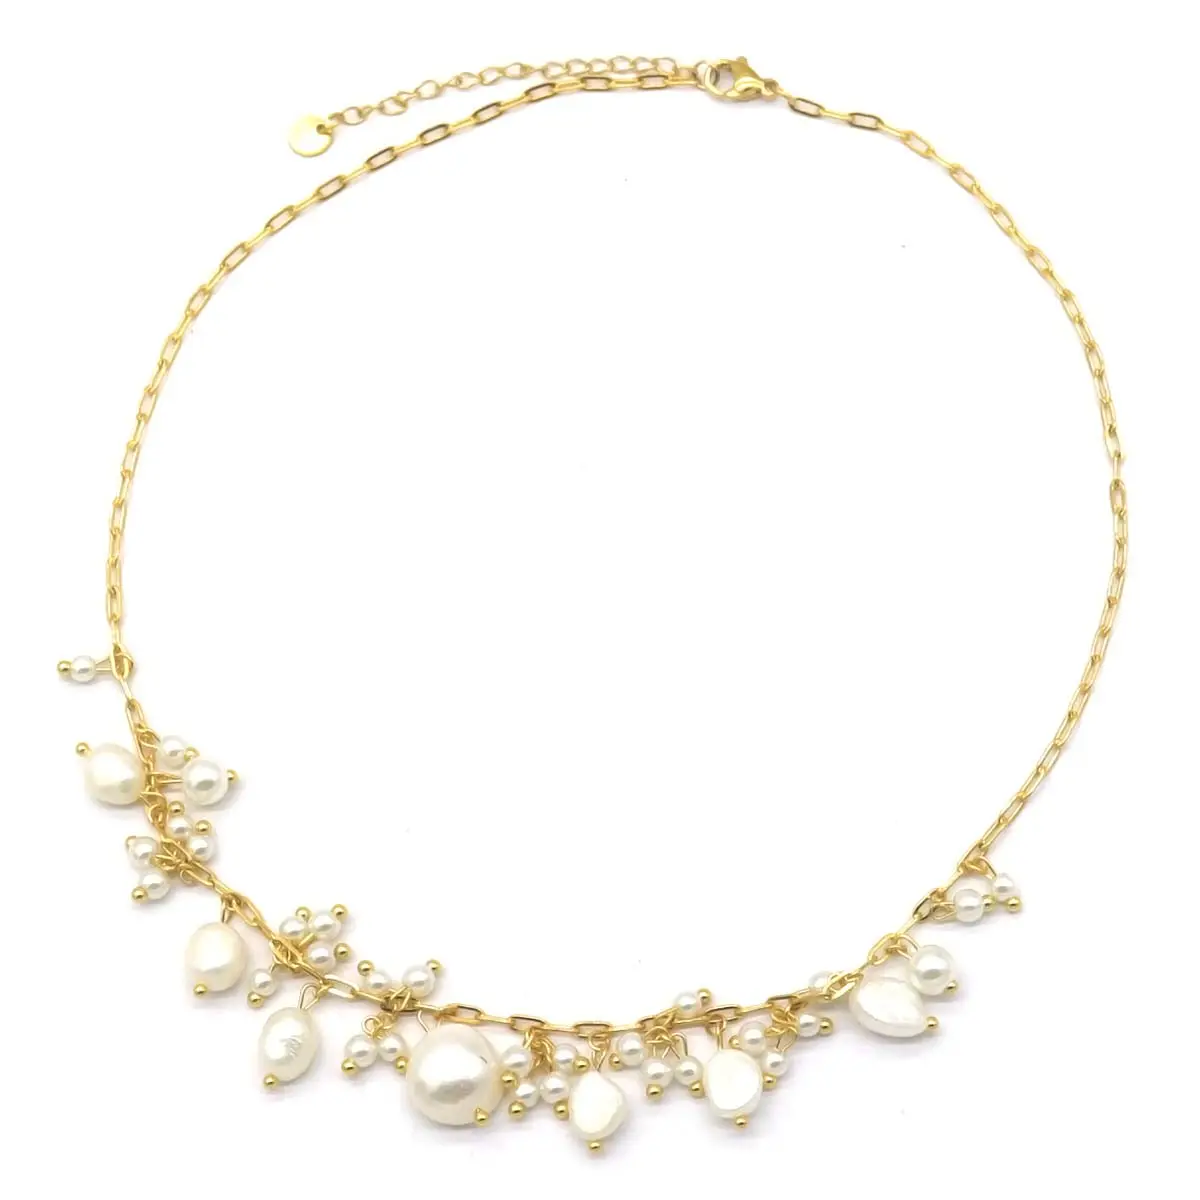 N221-390 Halo gold plated stainless steel quality fake pearl statement necklace women fashion jewelry